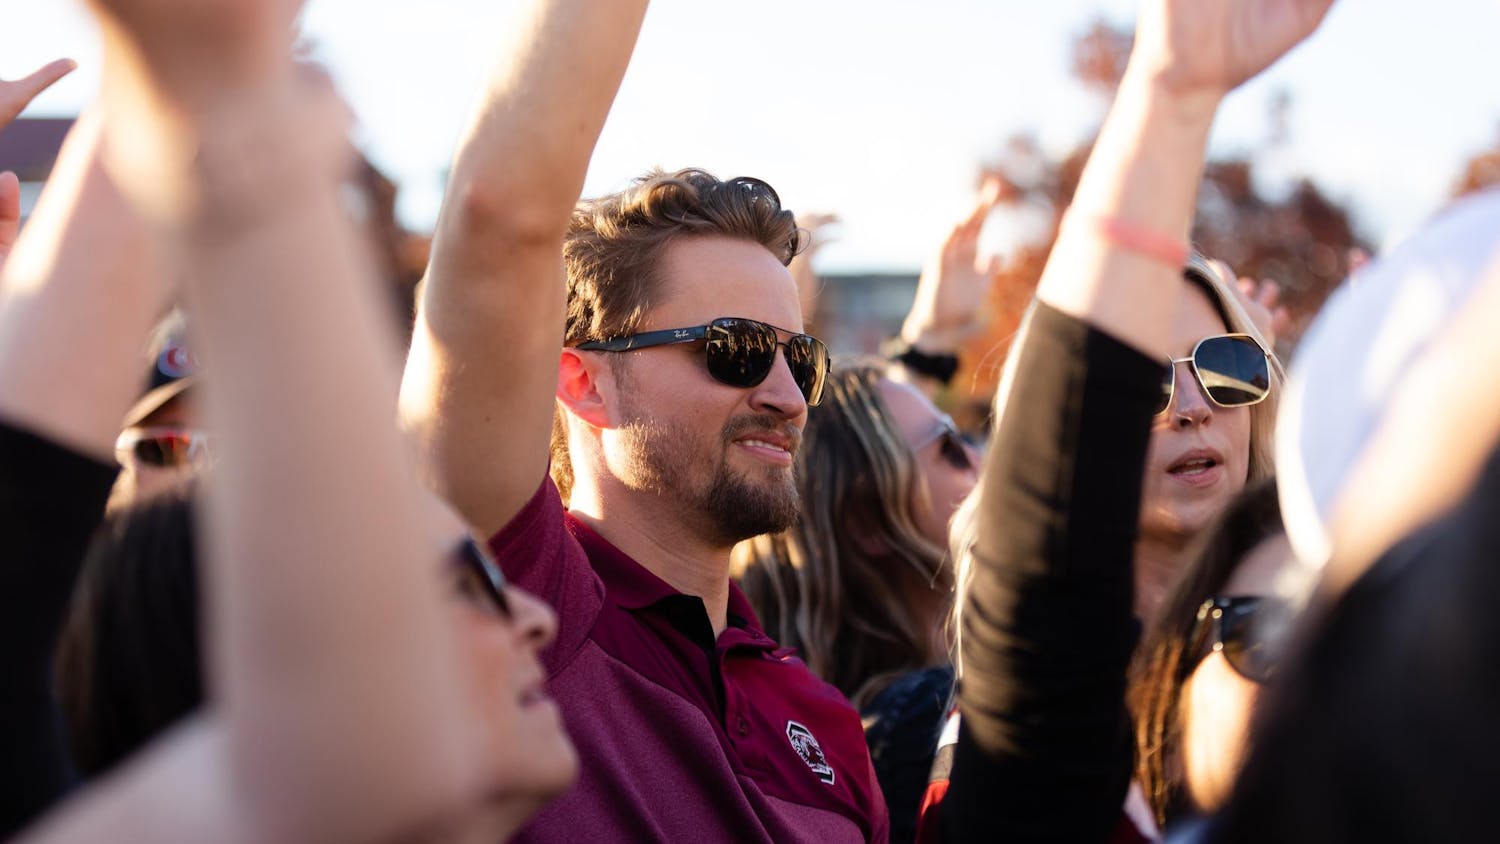 A fan moves his hands to the music while at the pre-game Darude concert in Gamecock Park. The Gamecocks went on to defeat the Wildcats 17-14.